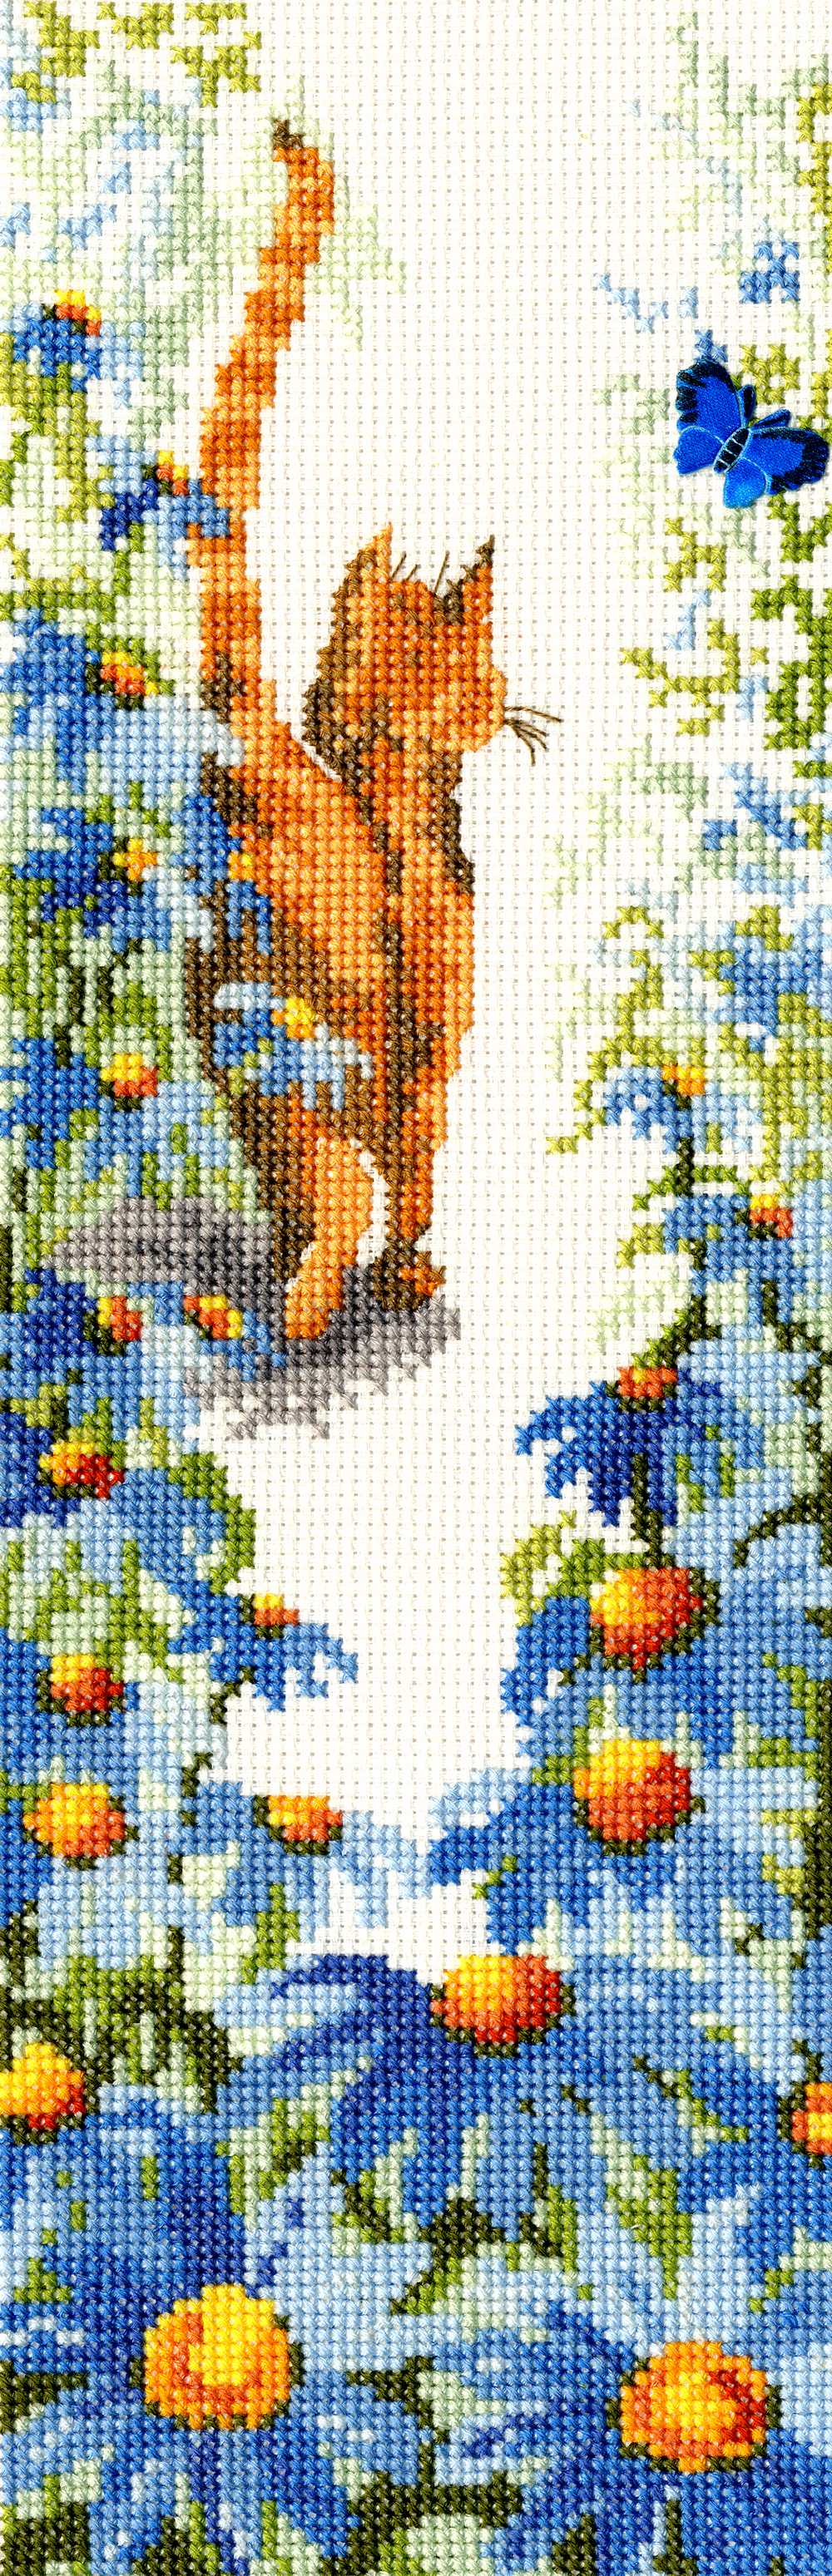 Follow Me 2 Cats Cross Stitch Kit From Bothy Threads